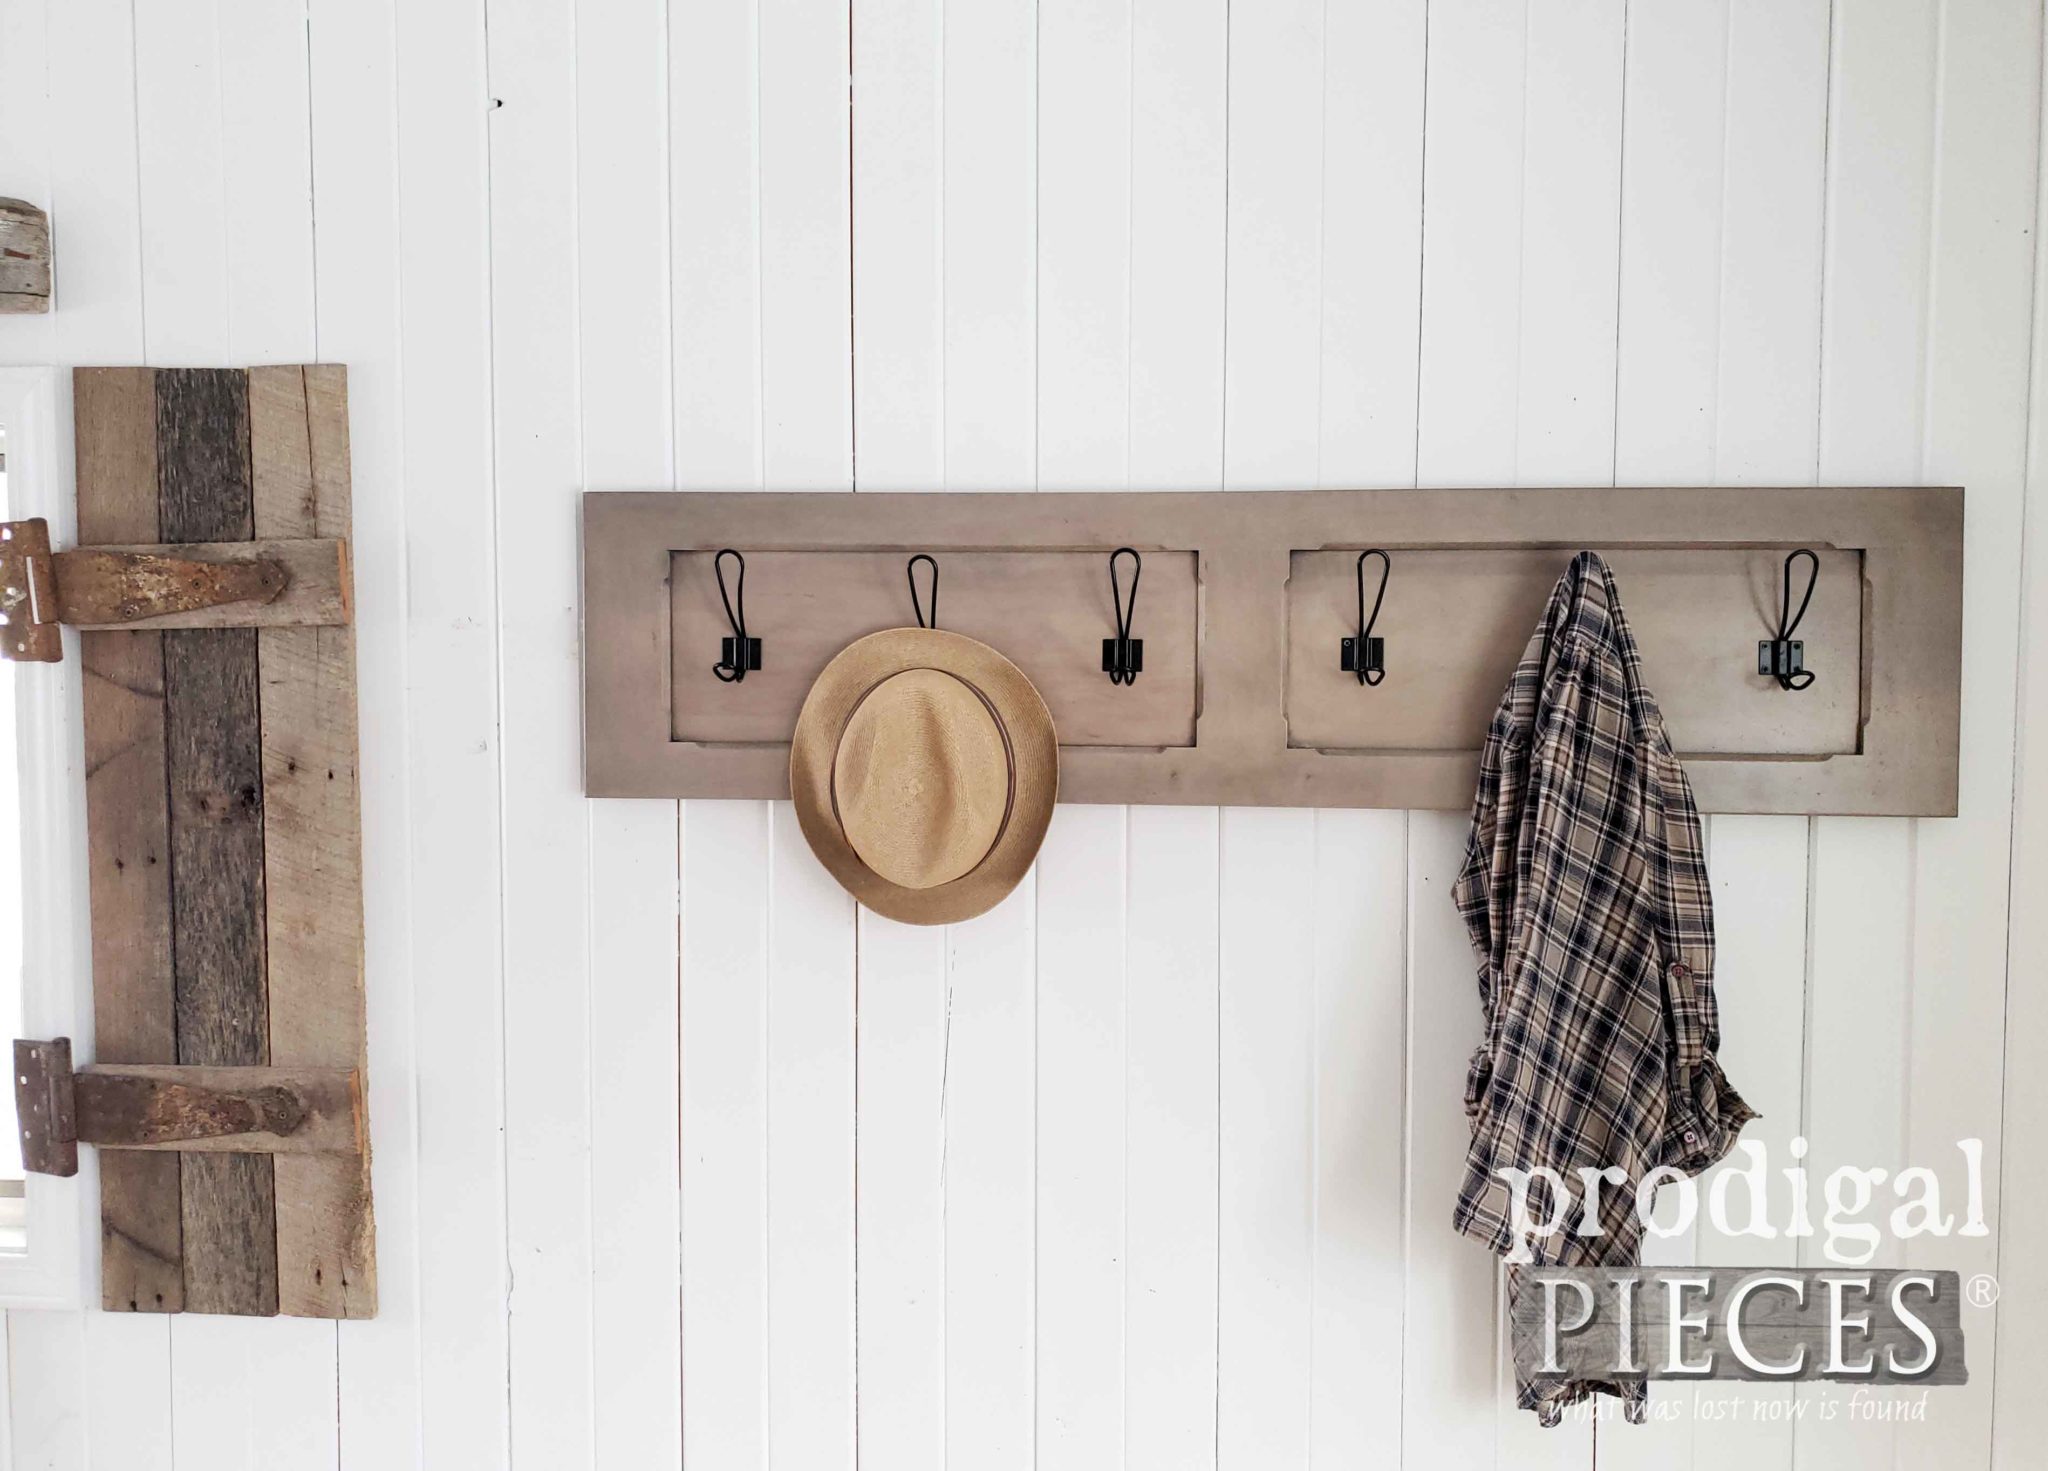 Rustic Weathered Gray Farmhouse Coat Rack Towel Rack by Larissa of Prodigal Pieces | prodigalpieces.com #prodigalpieces #handmade #farmhouse #shopping #home #homedecor #homedecorideas